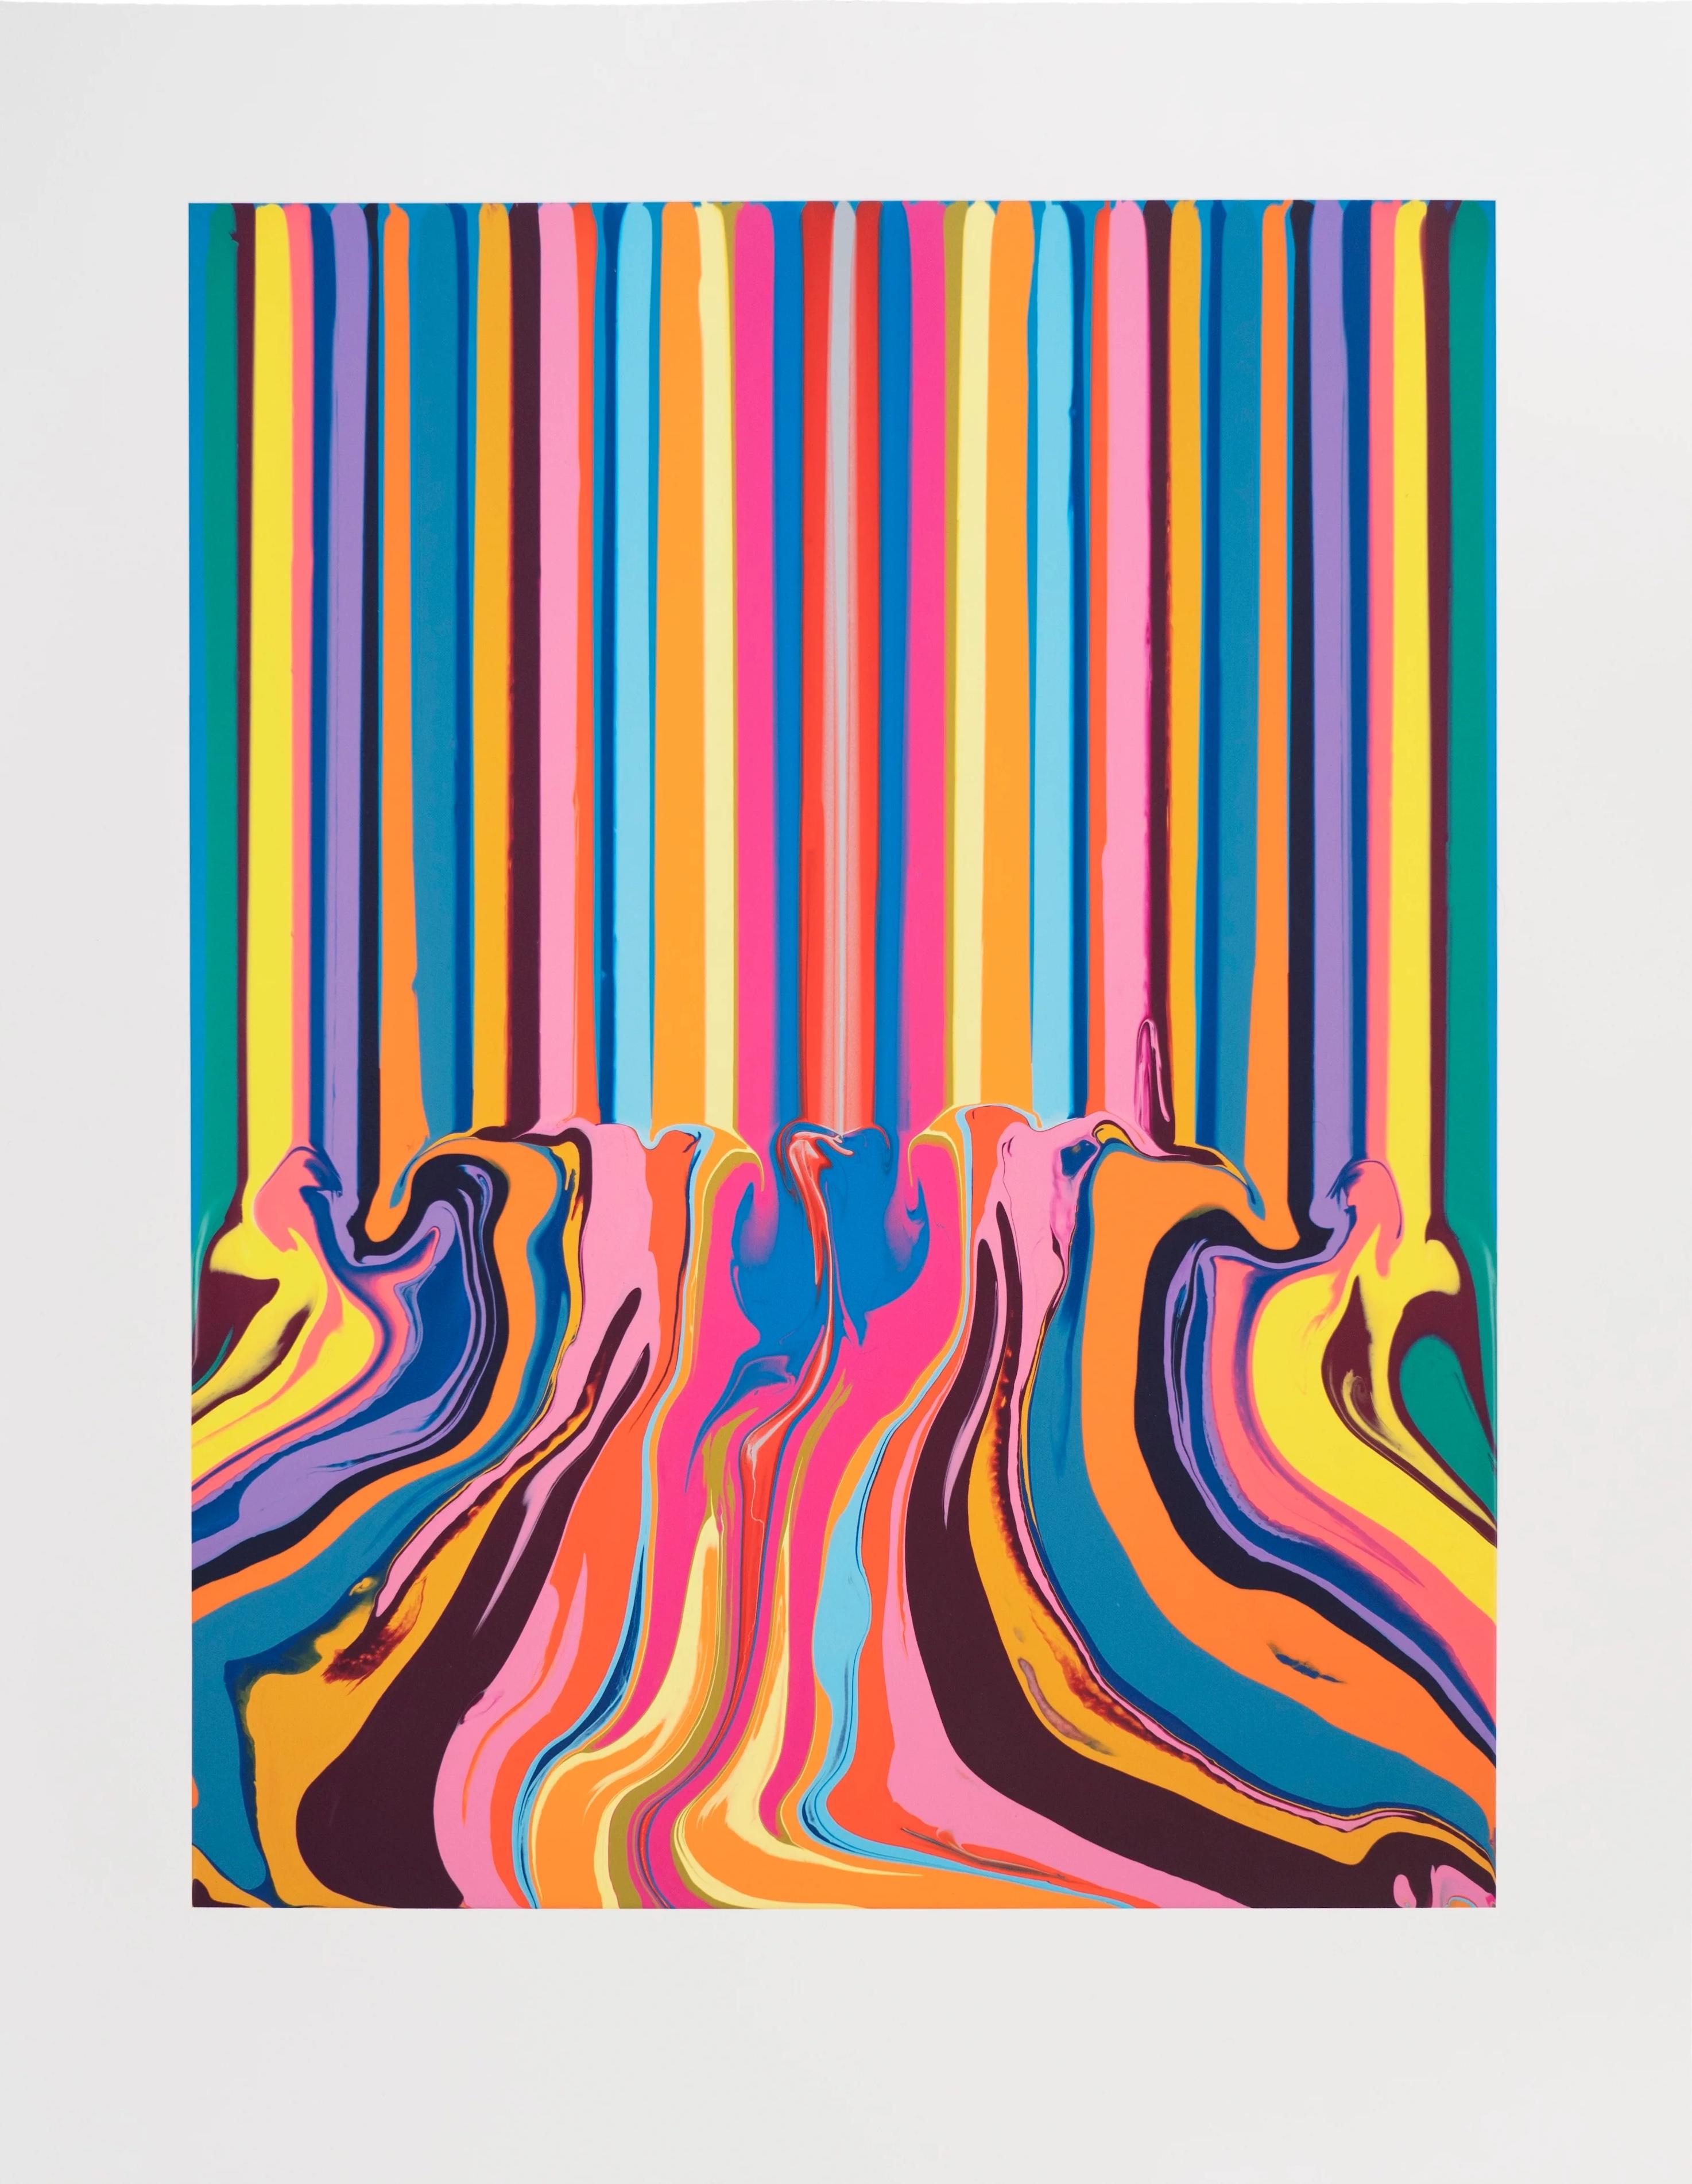 Uplift, 2020
Ian Davenport

Archival inkjet print in colours, on Somerset Satin paper
Signed, dated and numbered from the edition of 125
Published by Jealous Gallery, London
Image: 54.9 × 42.1 cm (21.6 × 16.5 in)
Sheet: 70.5 × 55.3 cm (27.7 × 21.7